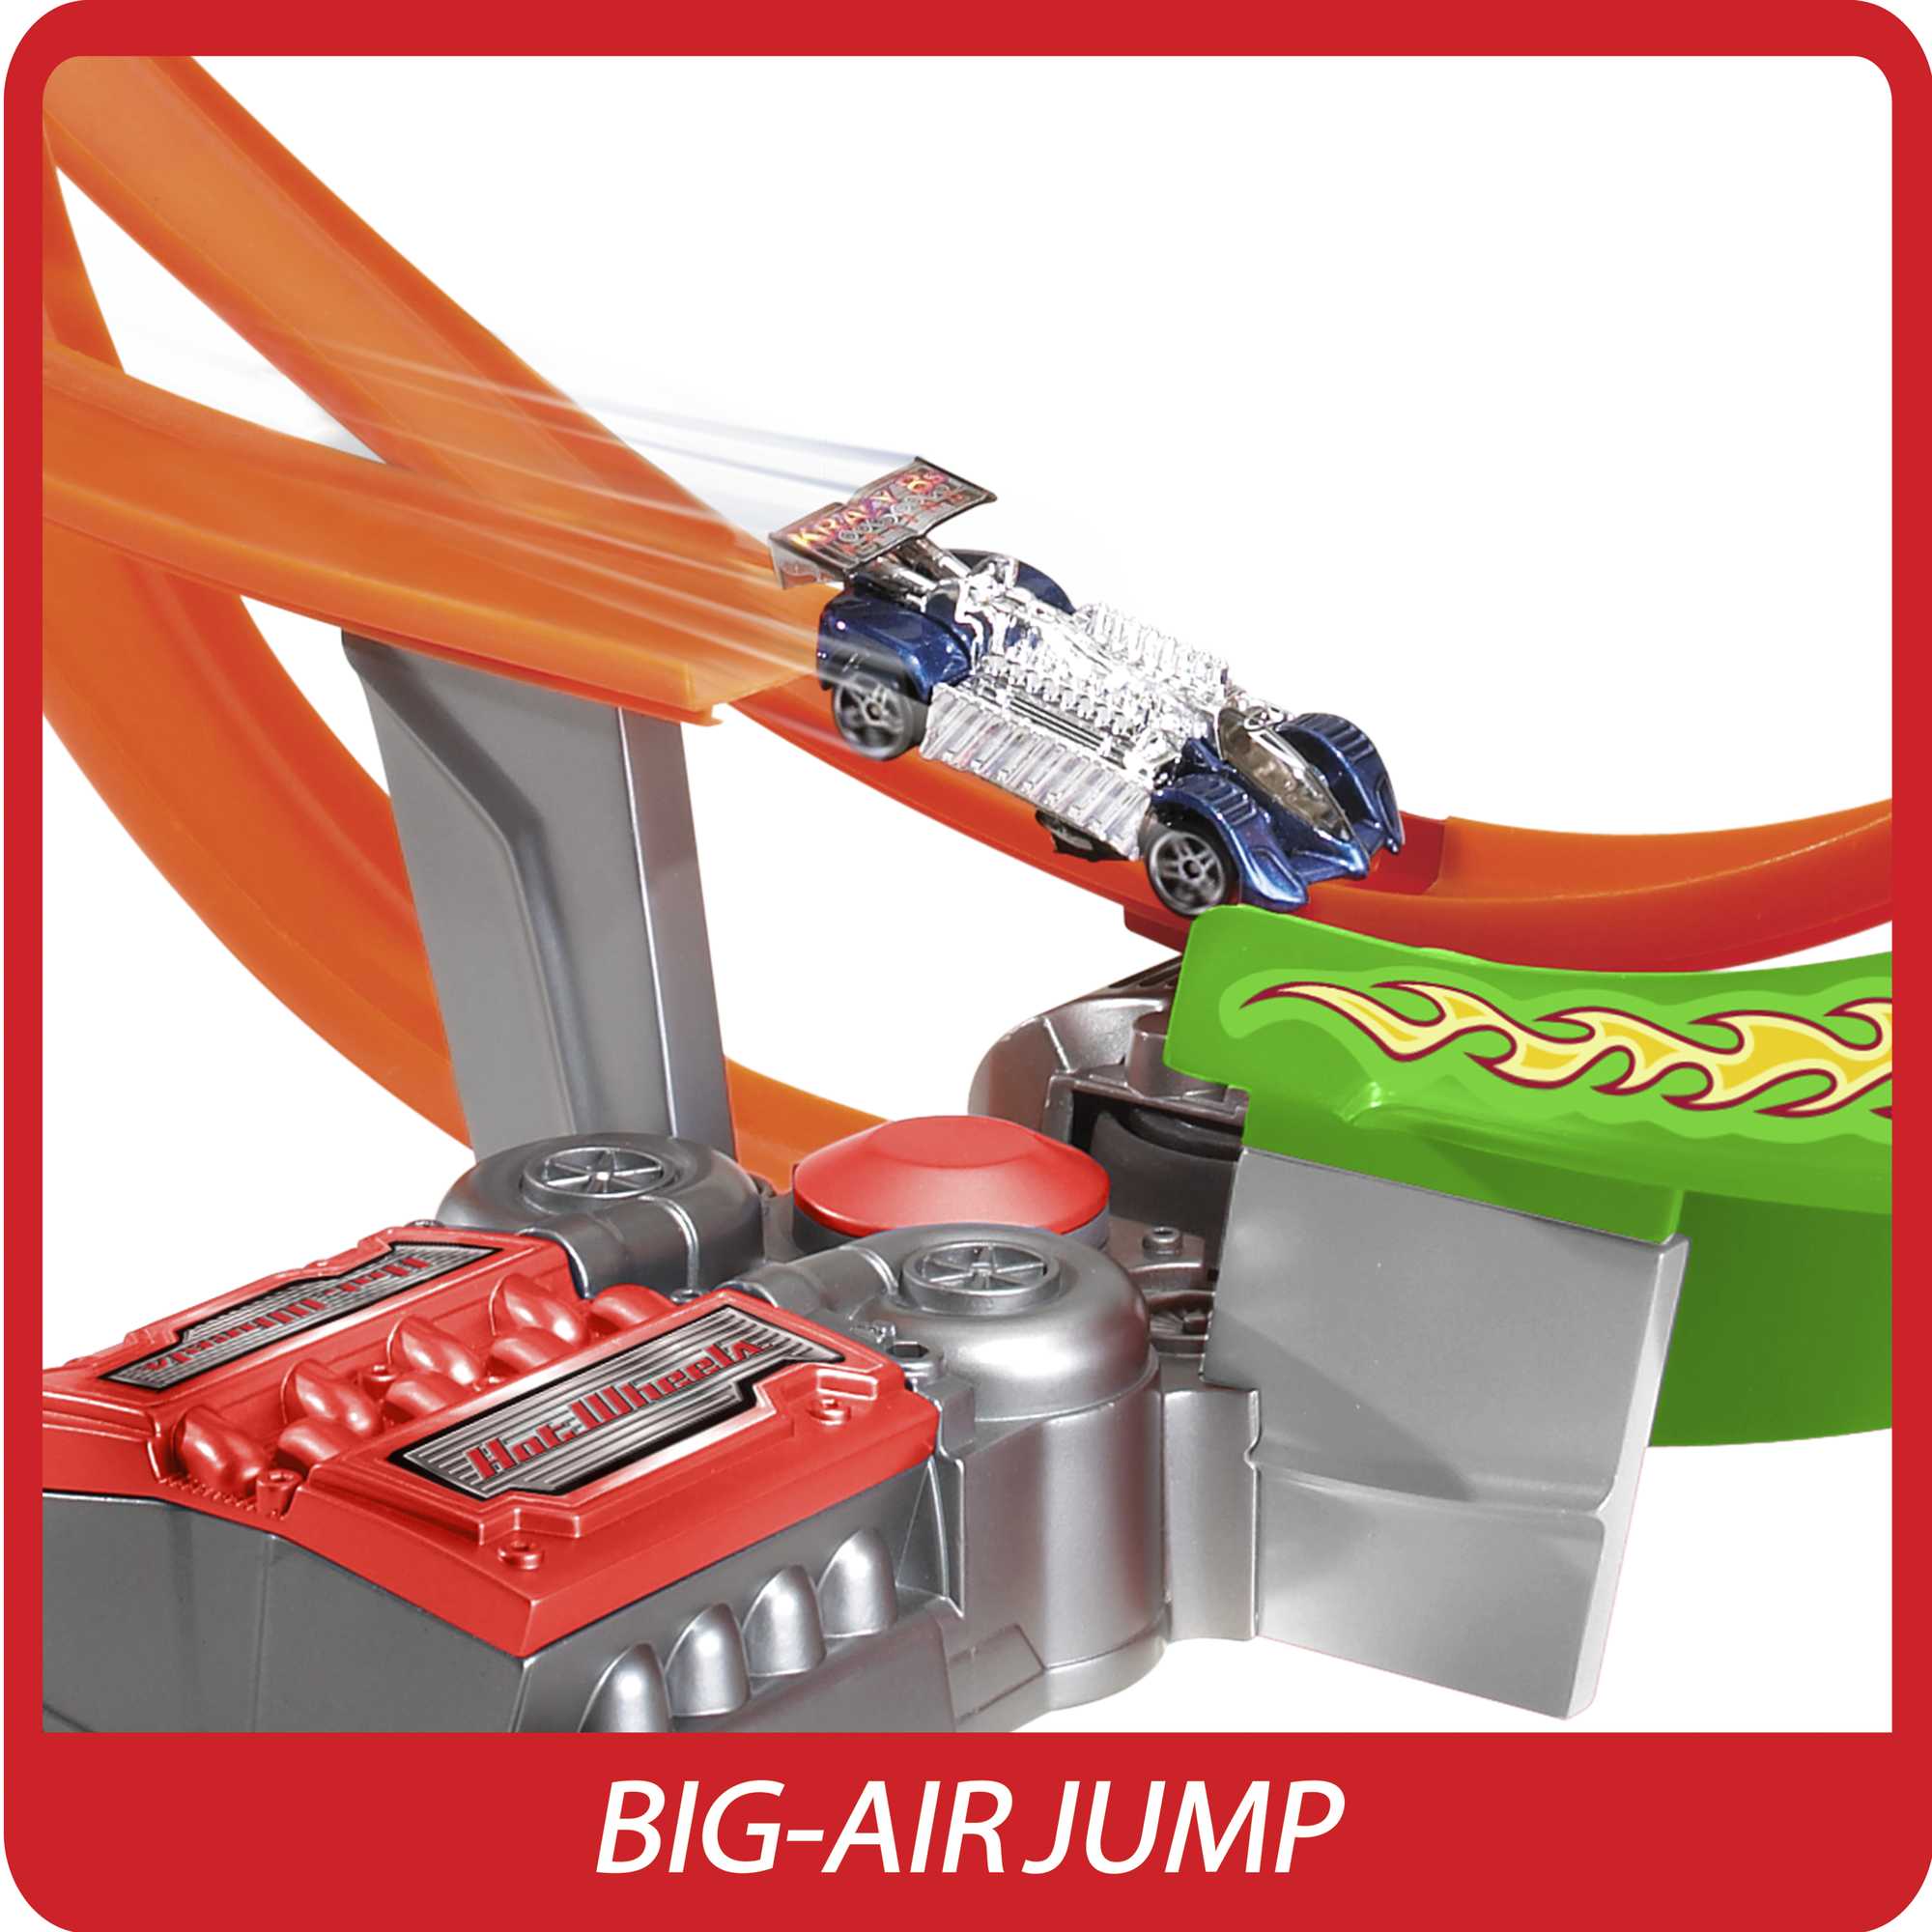 Hot Wheels Action Power Shift Motorized Raceway Track Set, Includes 5 Cars in 1:64 Scale - image 6 of 7